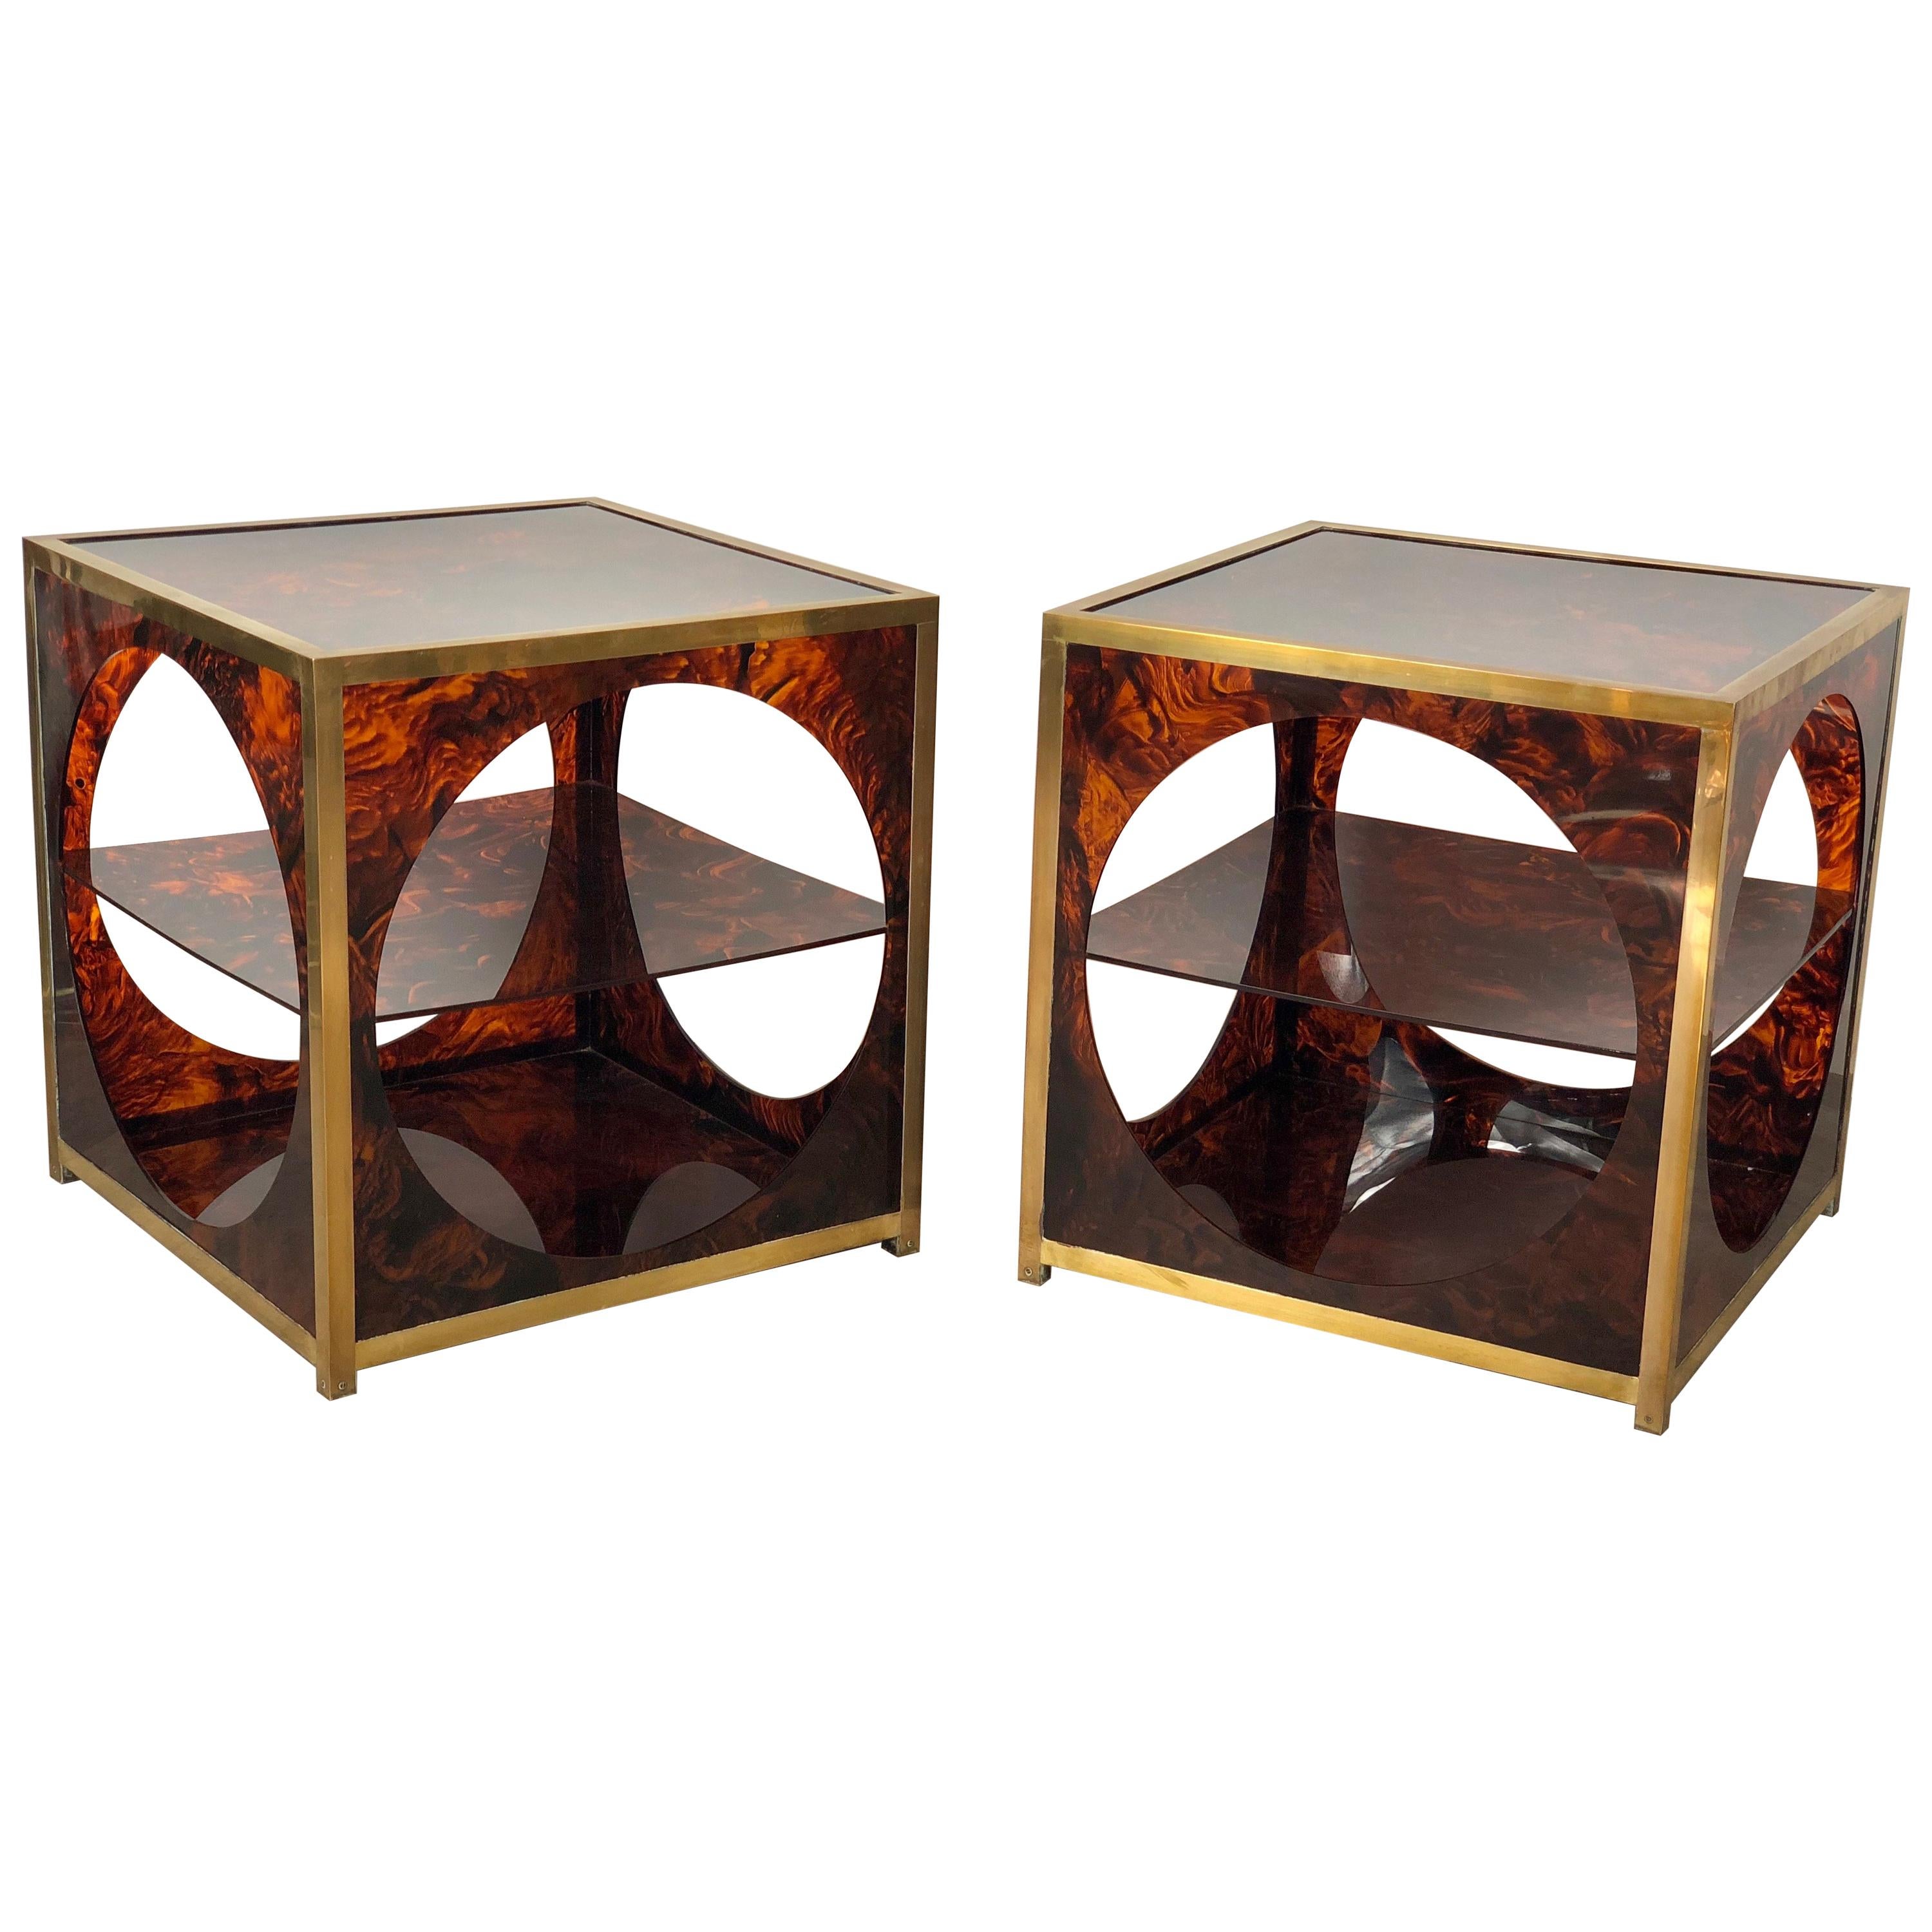 French Tortoiseshell Brass Coffee Side Tables in Christian Dior Style, 1970s